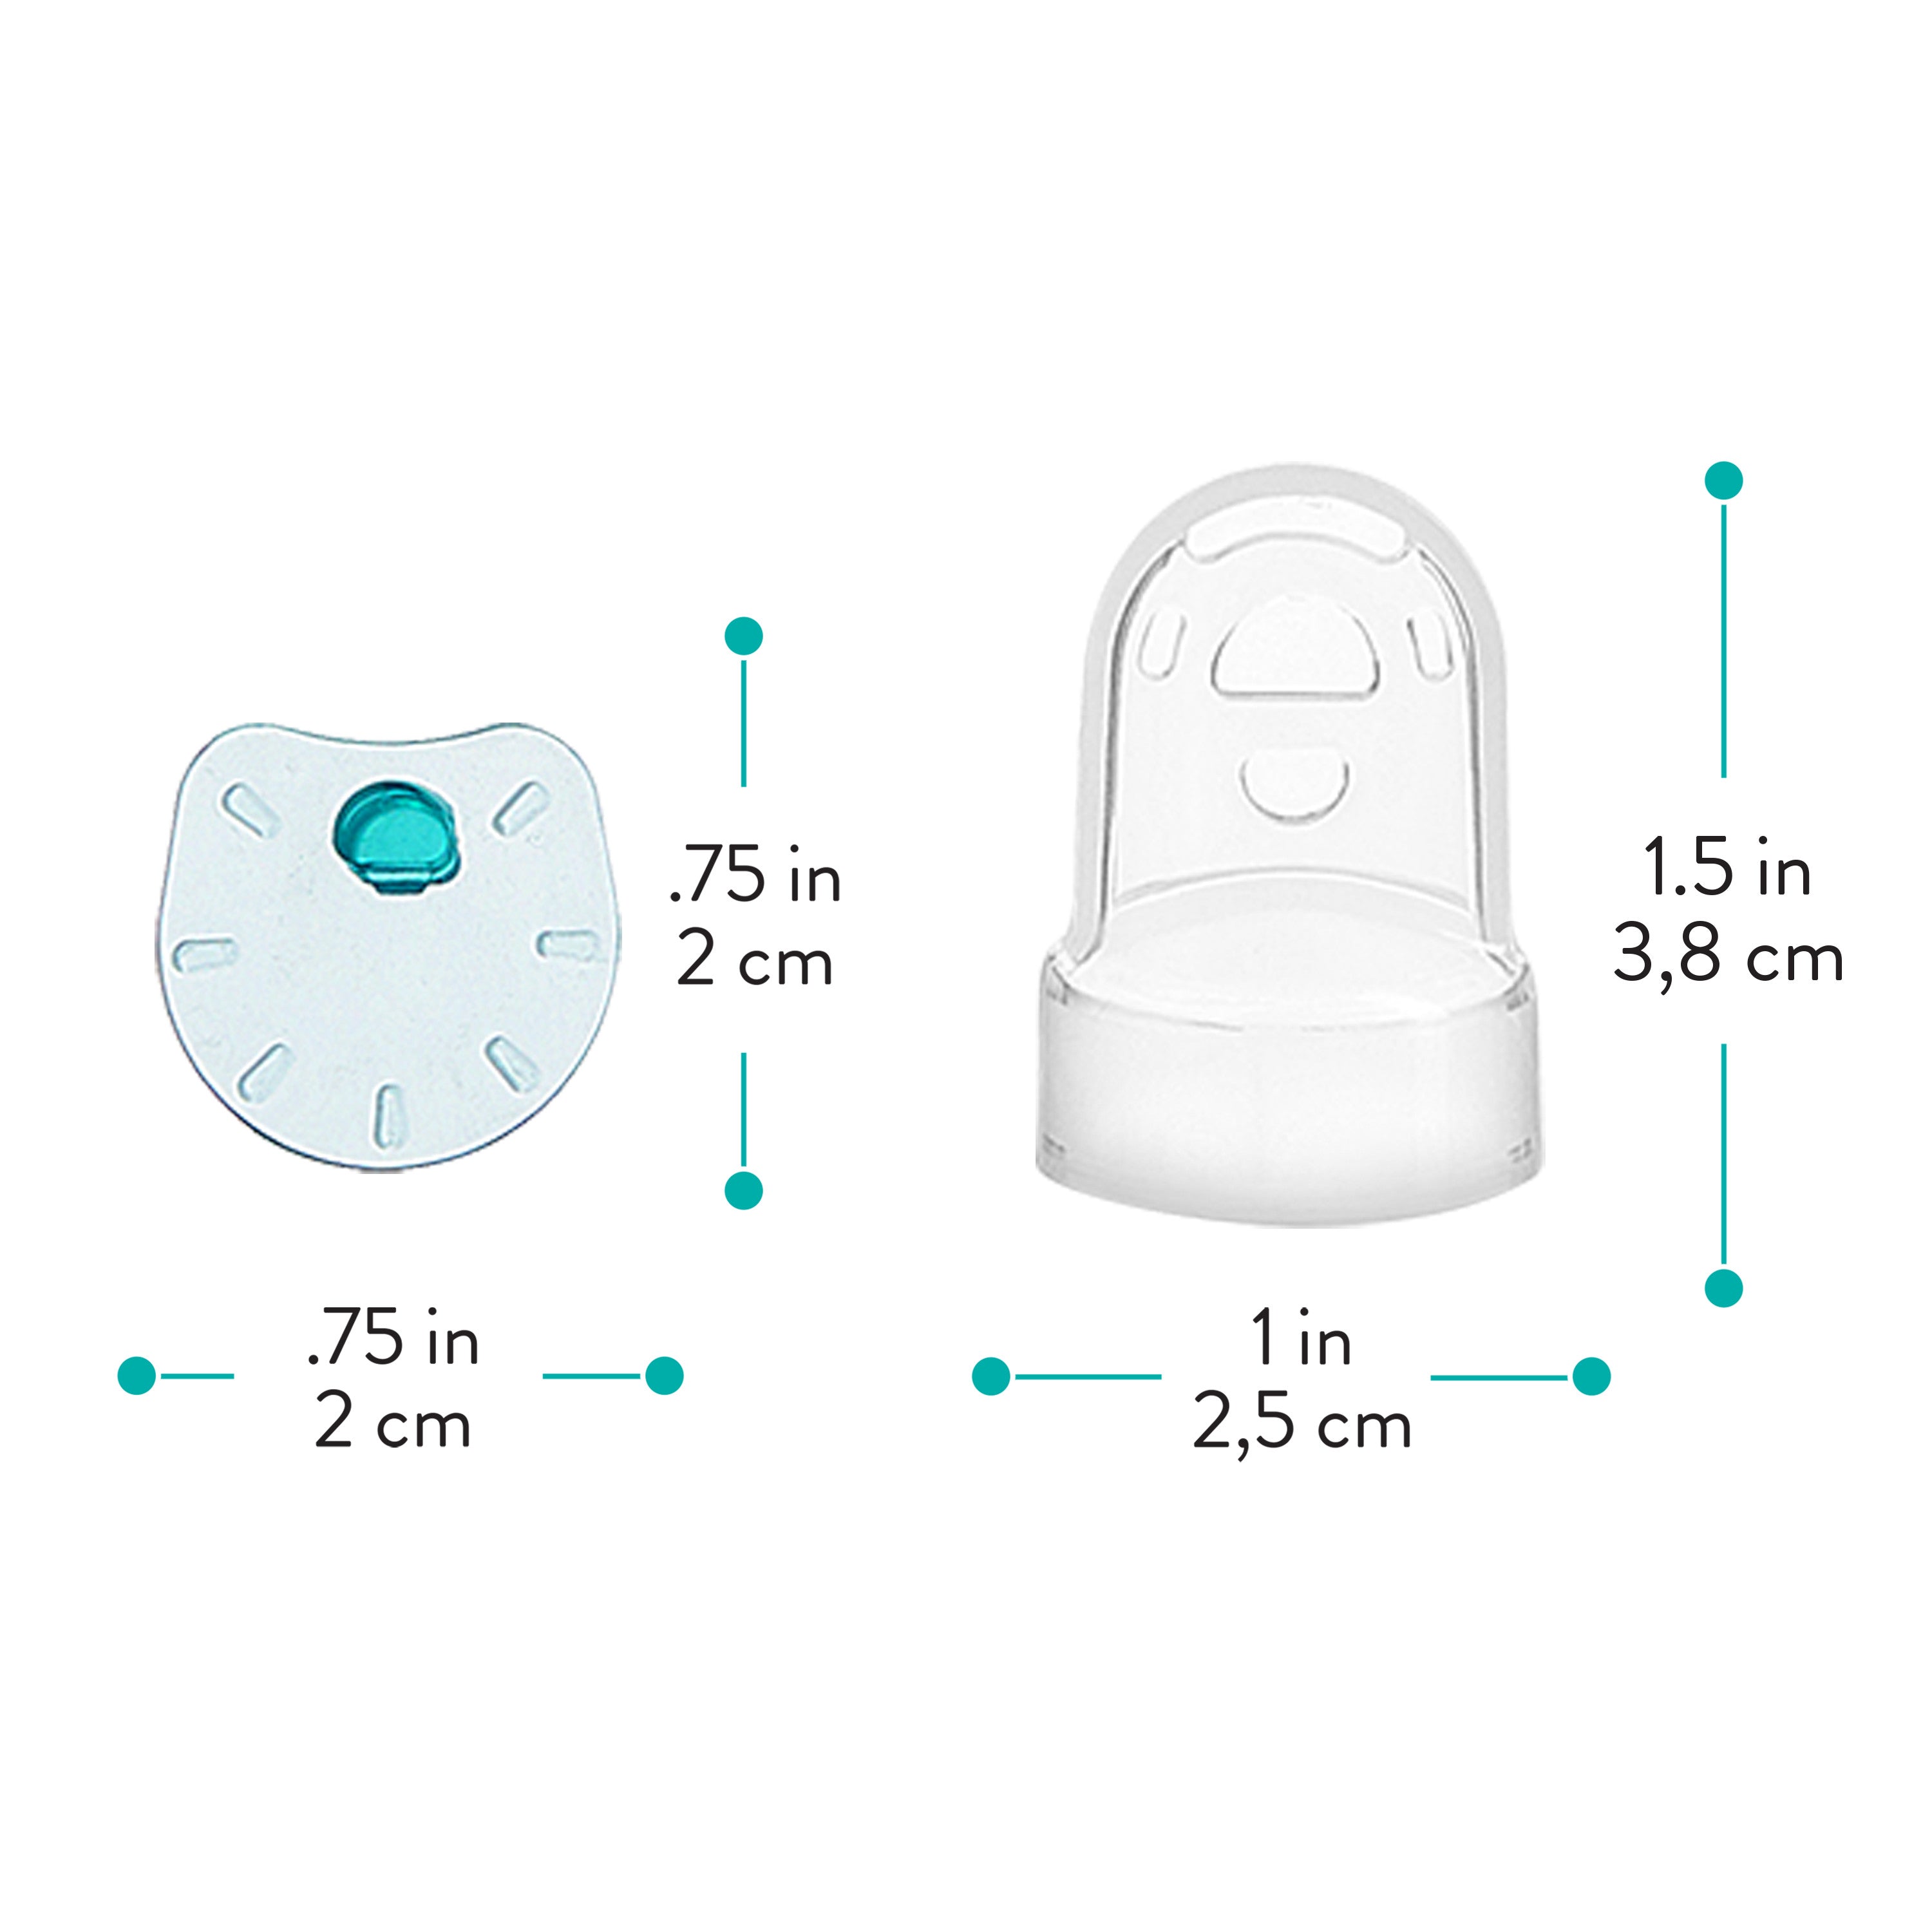 Evenflo Replacement Breast Pump Membranes and Valves, 2pk – Evenflo Feeding